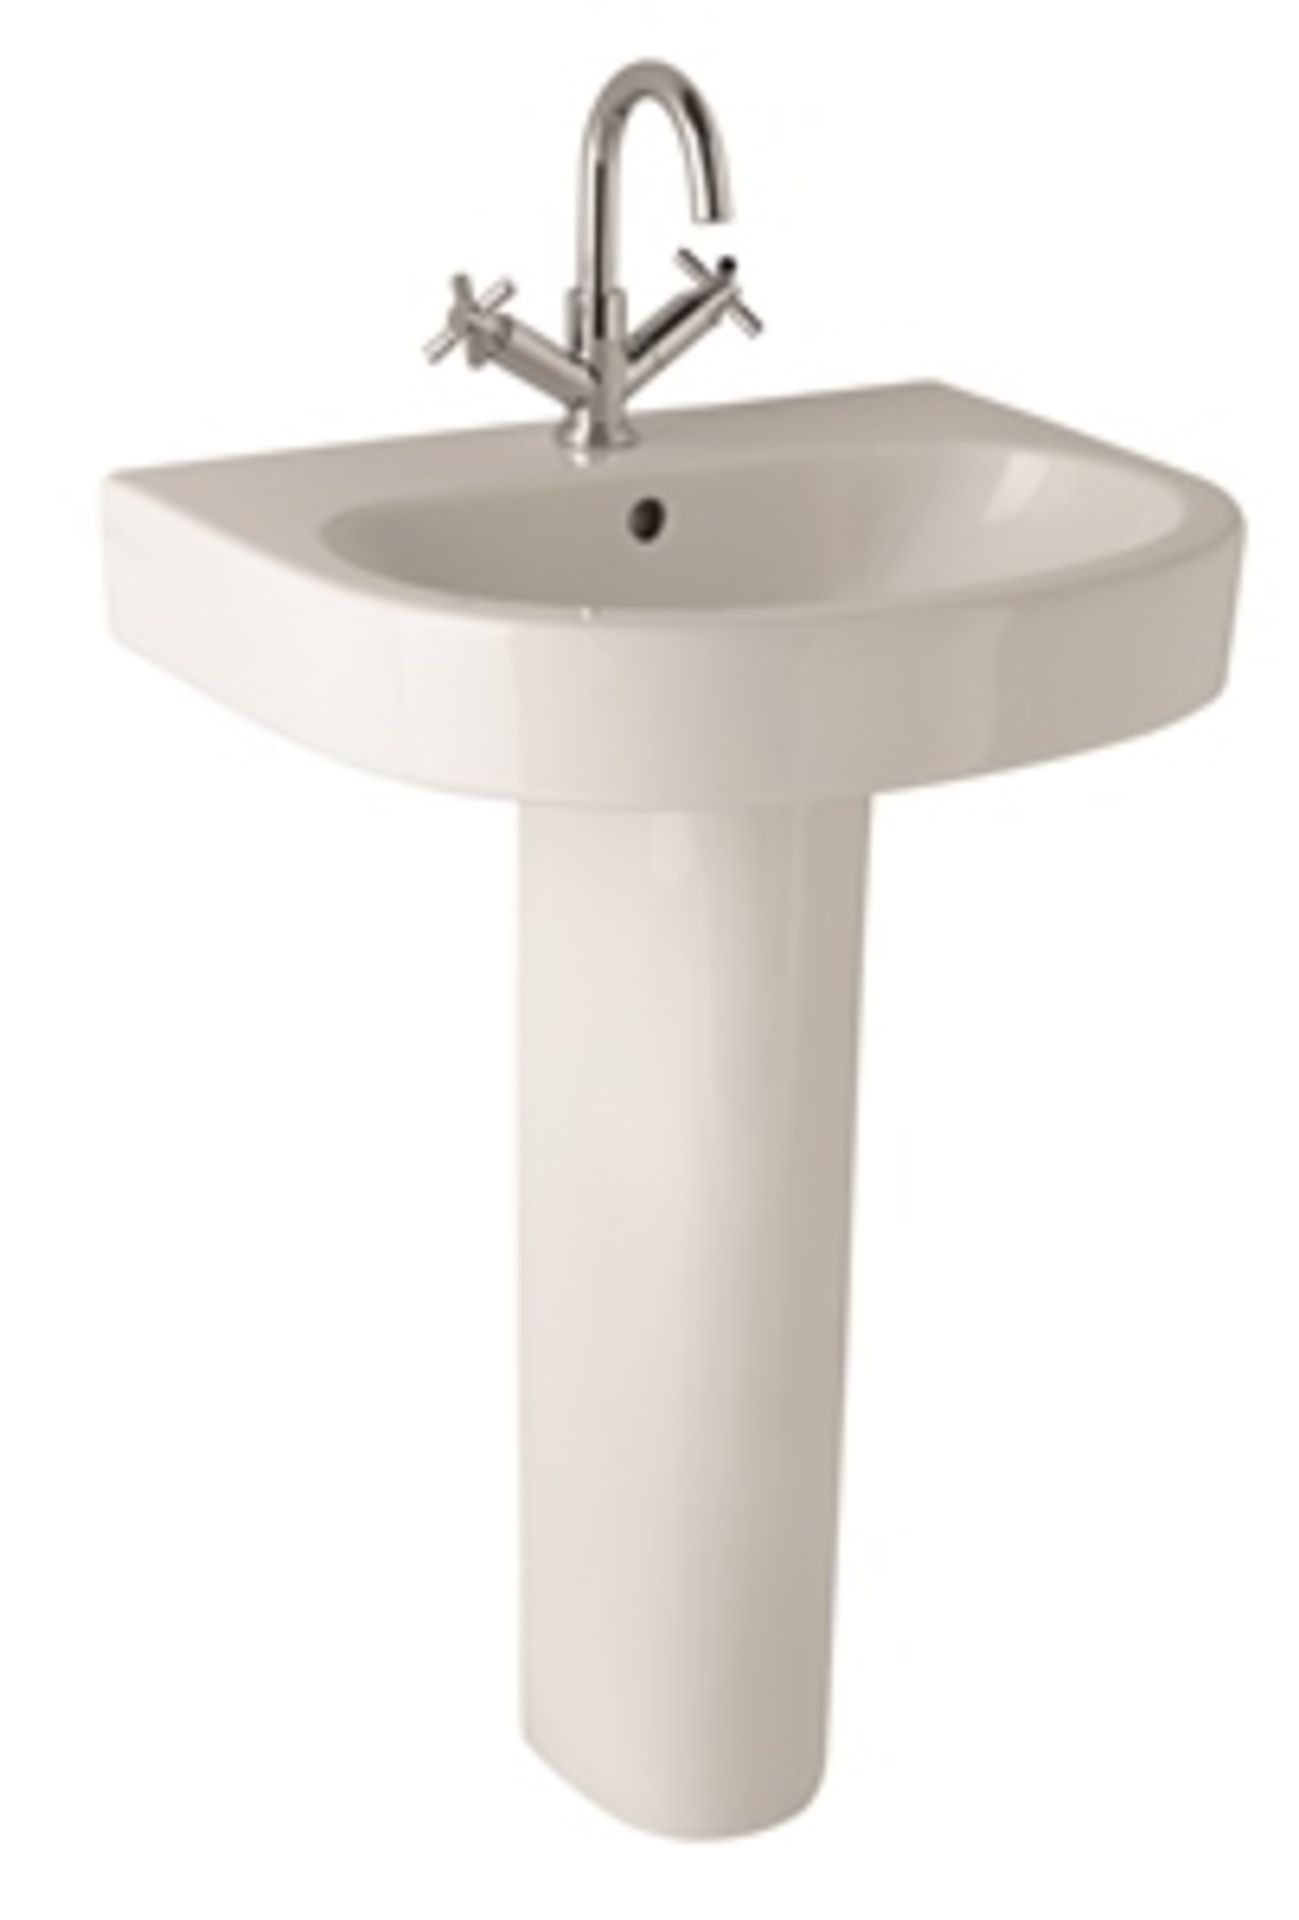 10 x Vogue Bathrooms COSMOS Single Tap Hole SINK BASINS With Pedestals - 600mm Width - Brand New